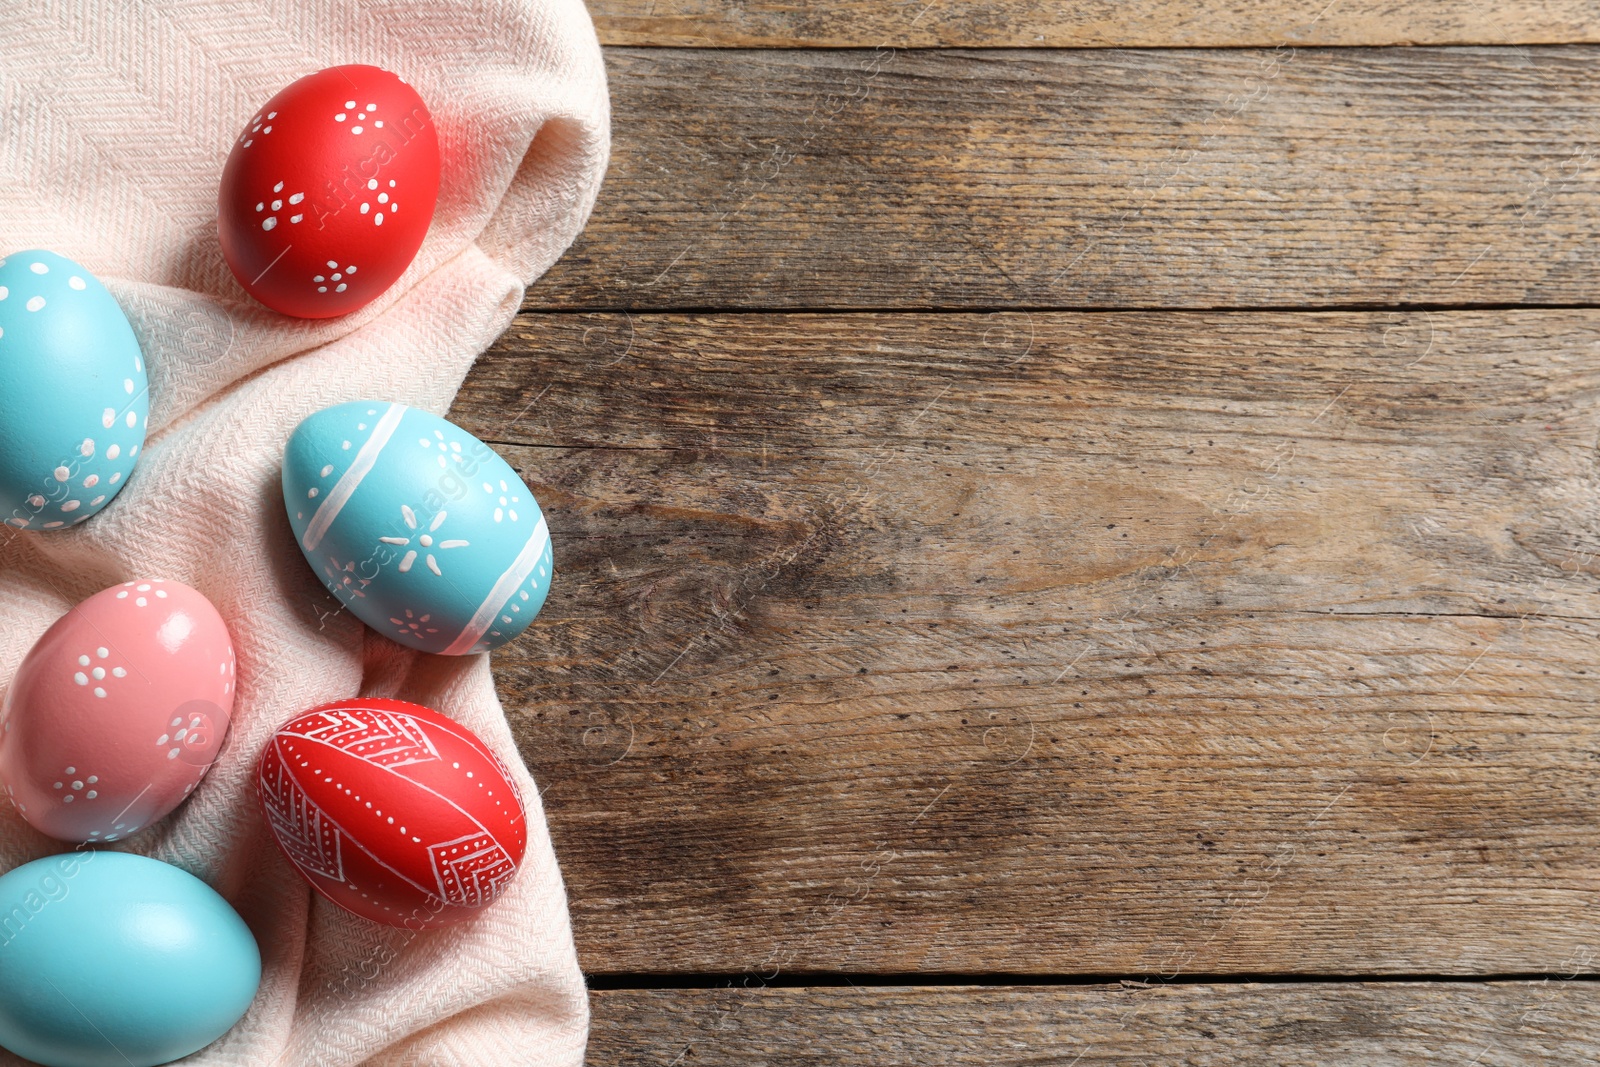 Photo of Flat lay composition of colorful painted Easter eggs on wooden table, space for text